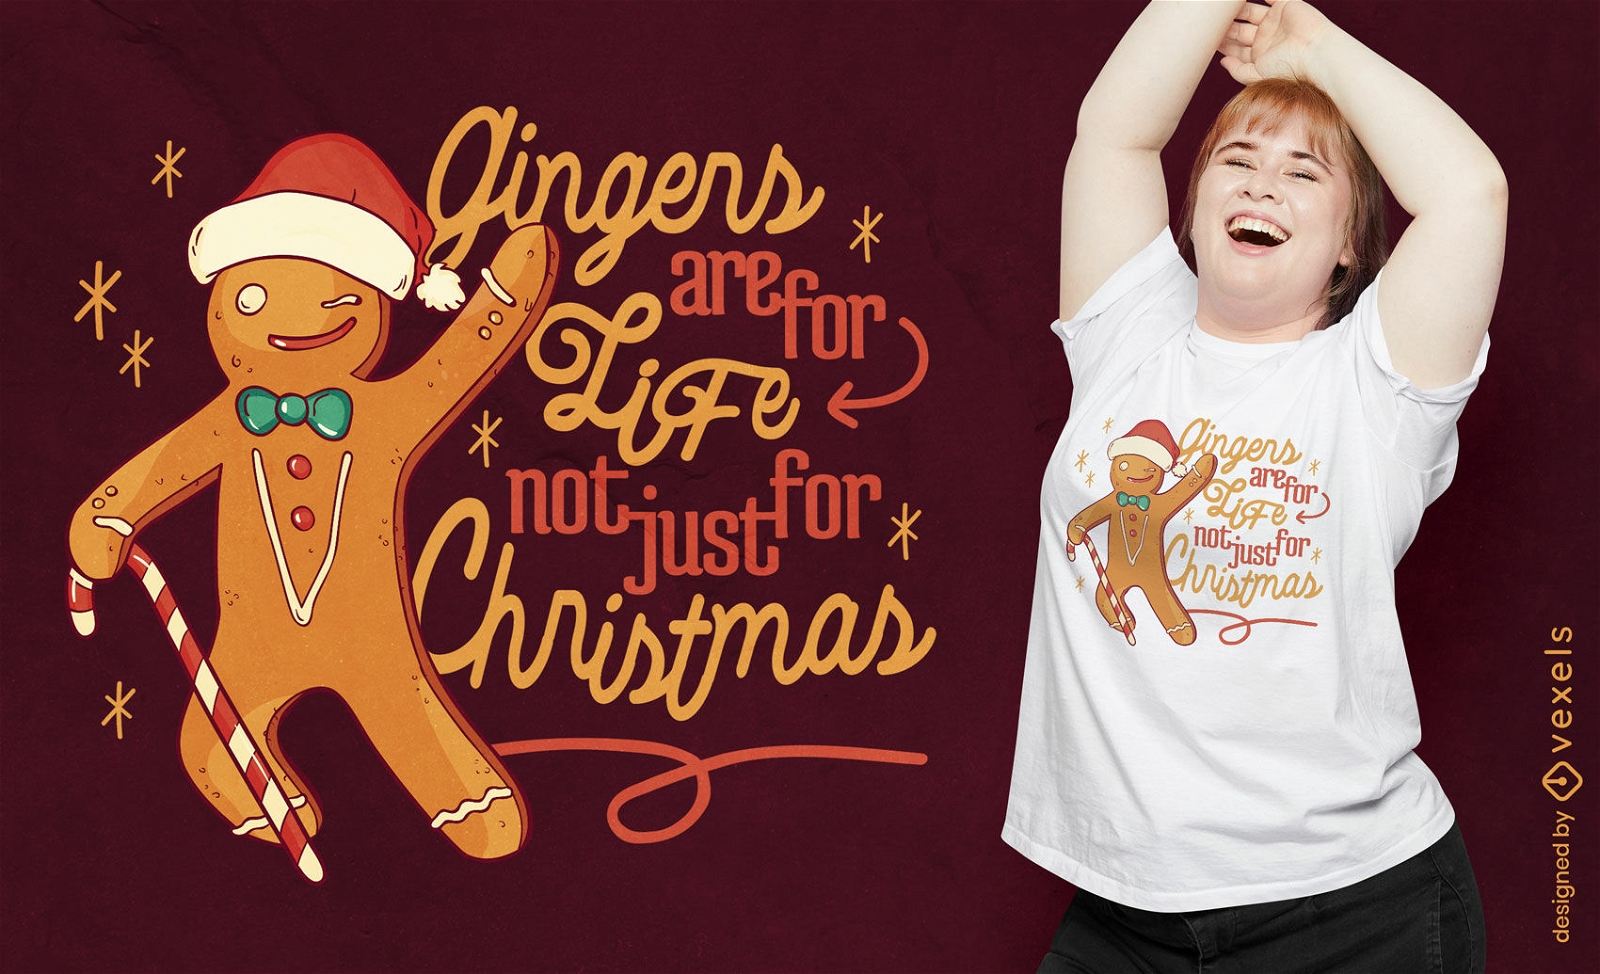 Gingers for life t-shirt design